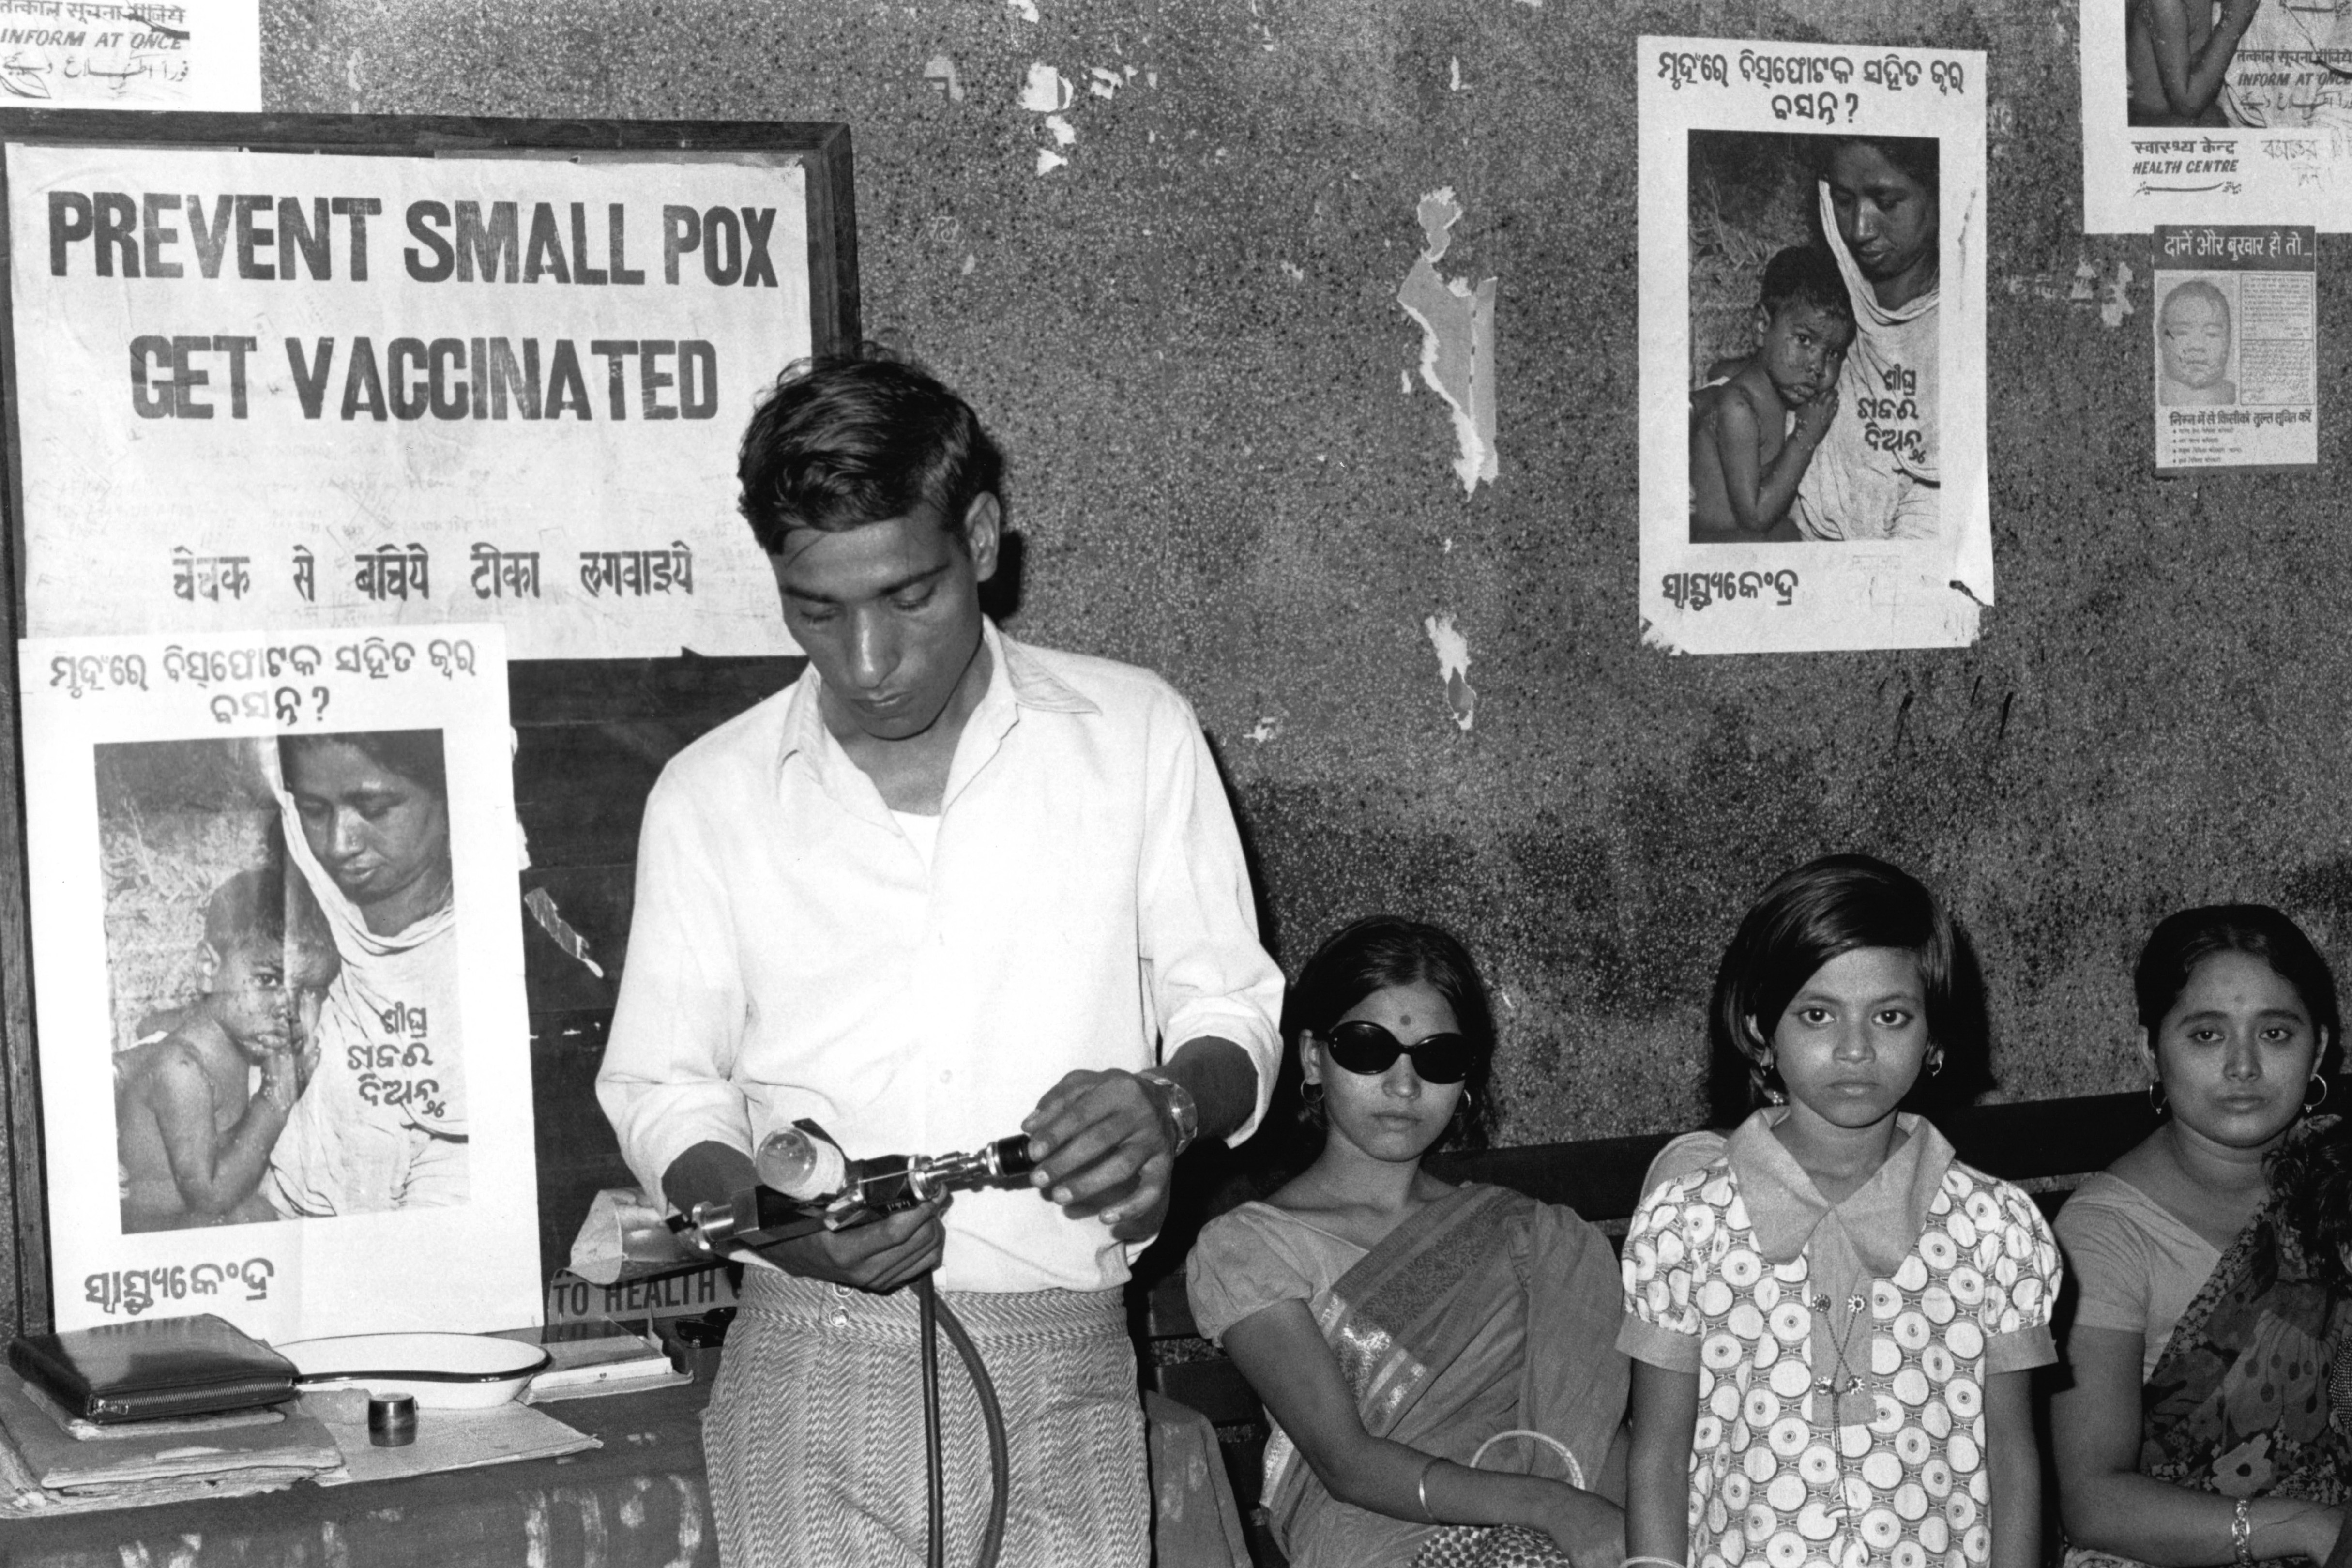 In this 1974, black and white film photograph, a doctor is standing beside two women and one young girl who are waiting to be vaccinated. He holds a jet injectorIn his hands, preparing for vaccination. Beside him and on the walls are posters that say, 鈥淧revent Smallpox 鈥� Get Vaccinated鈥� and show images of a mother holding a child with smallpox.